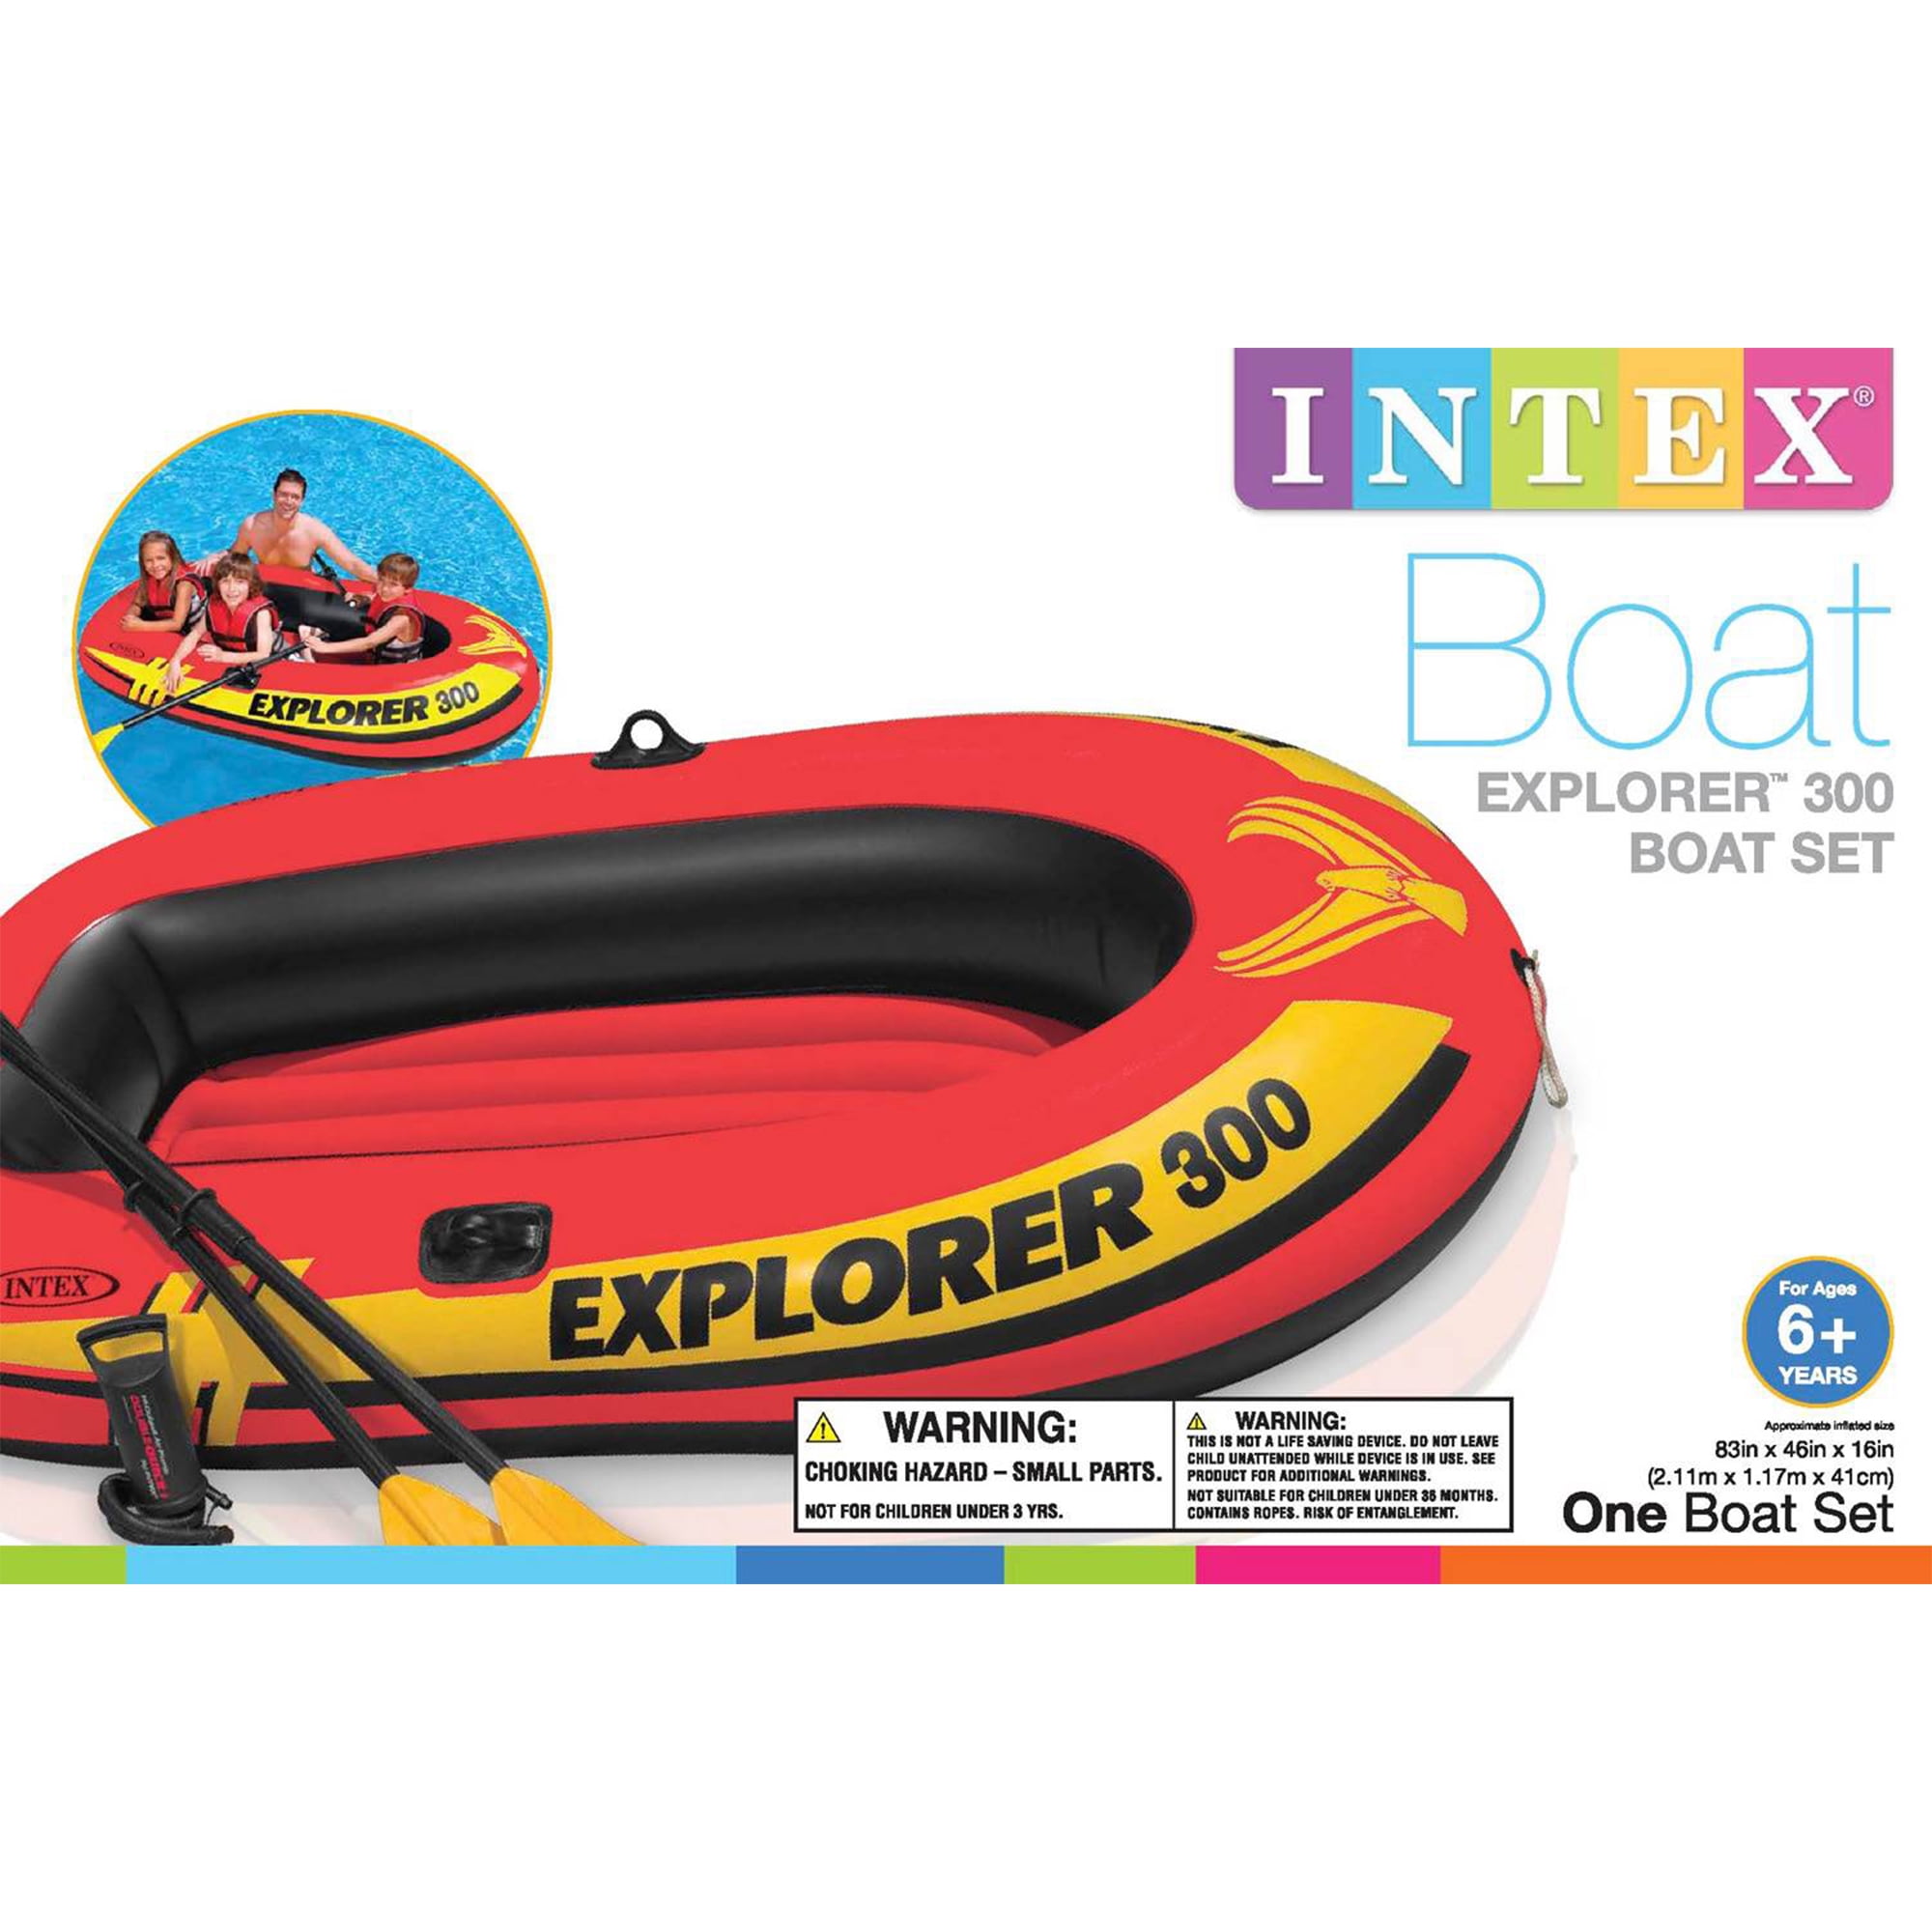 3 Raft Compact Pump Oars Boat 300 Fishing with Explorer & Inflatable Intex Person